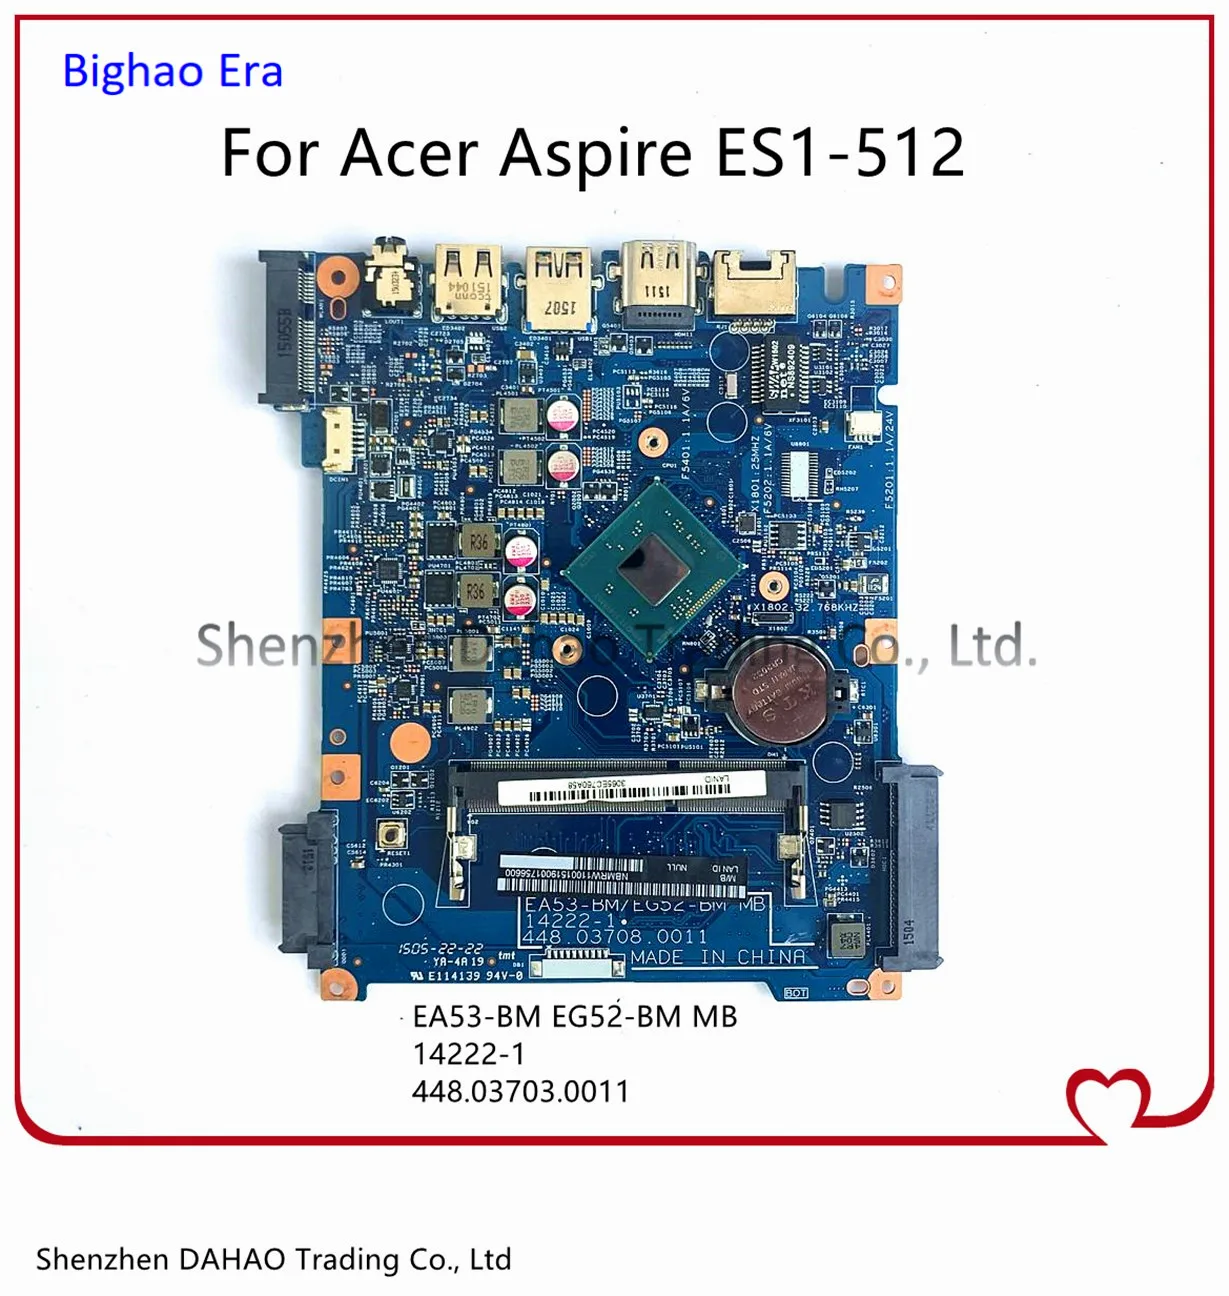 

EA53-BM EG52-BM 14222-1 MB For Acer Aspire ES1-512 Laptop Motherboard With Intel CPU NBMRW11003 448.03703.0011 100% Fully Tested